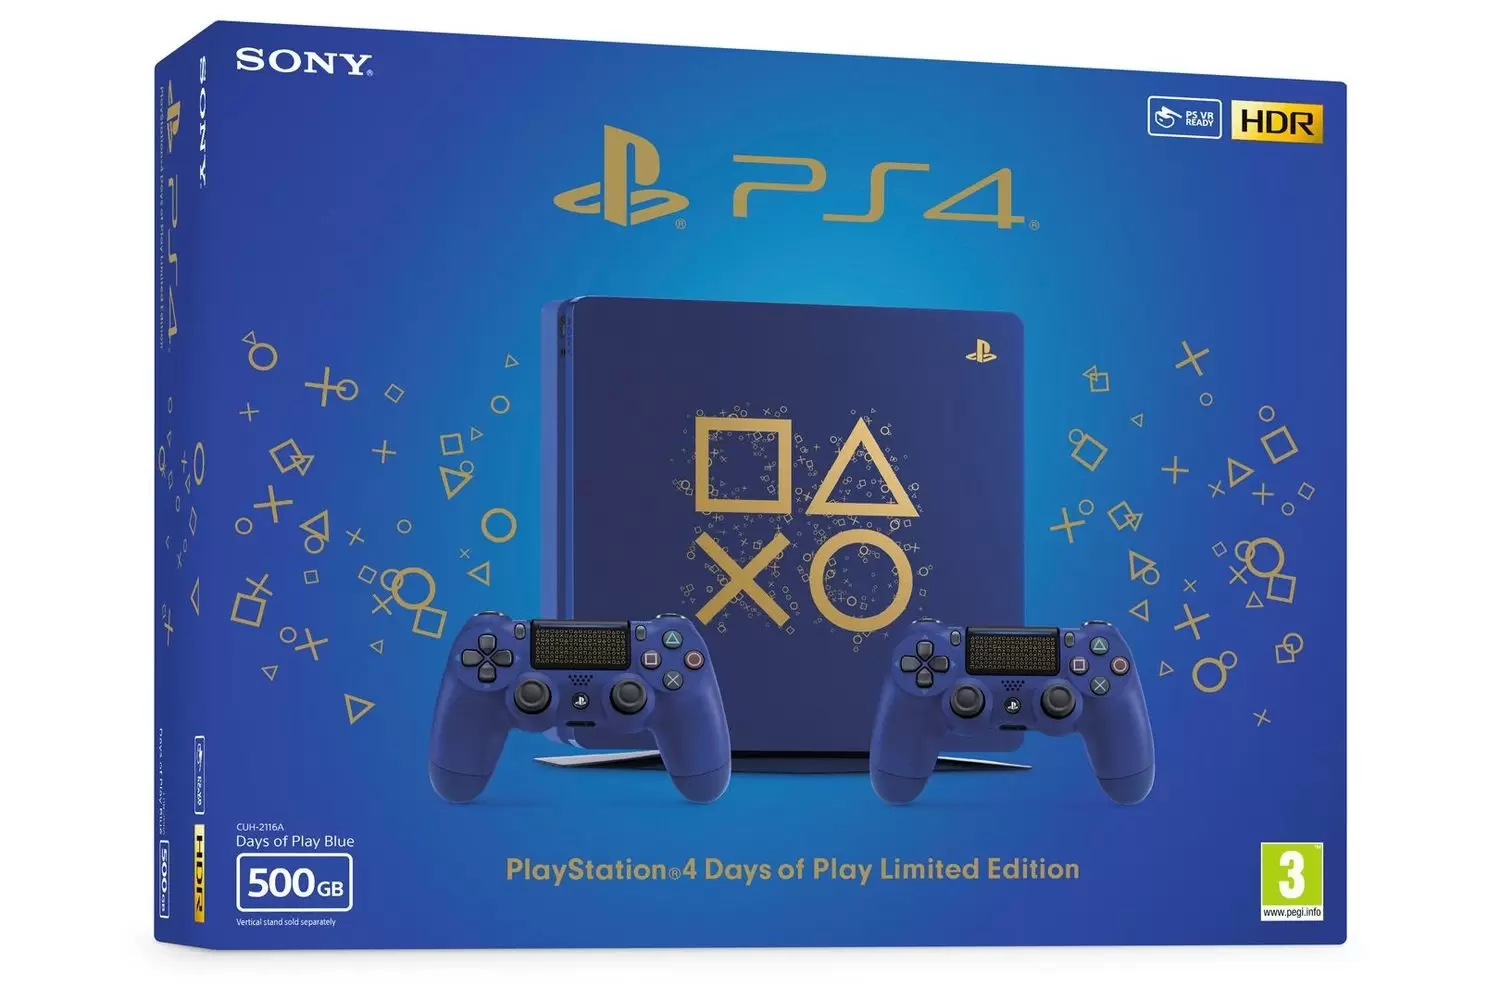 PS4 Stuff - Sony Playstation 4 Days of Plays Limited Edition